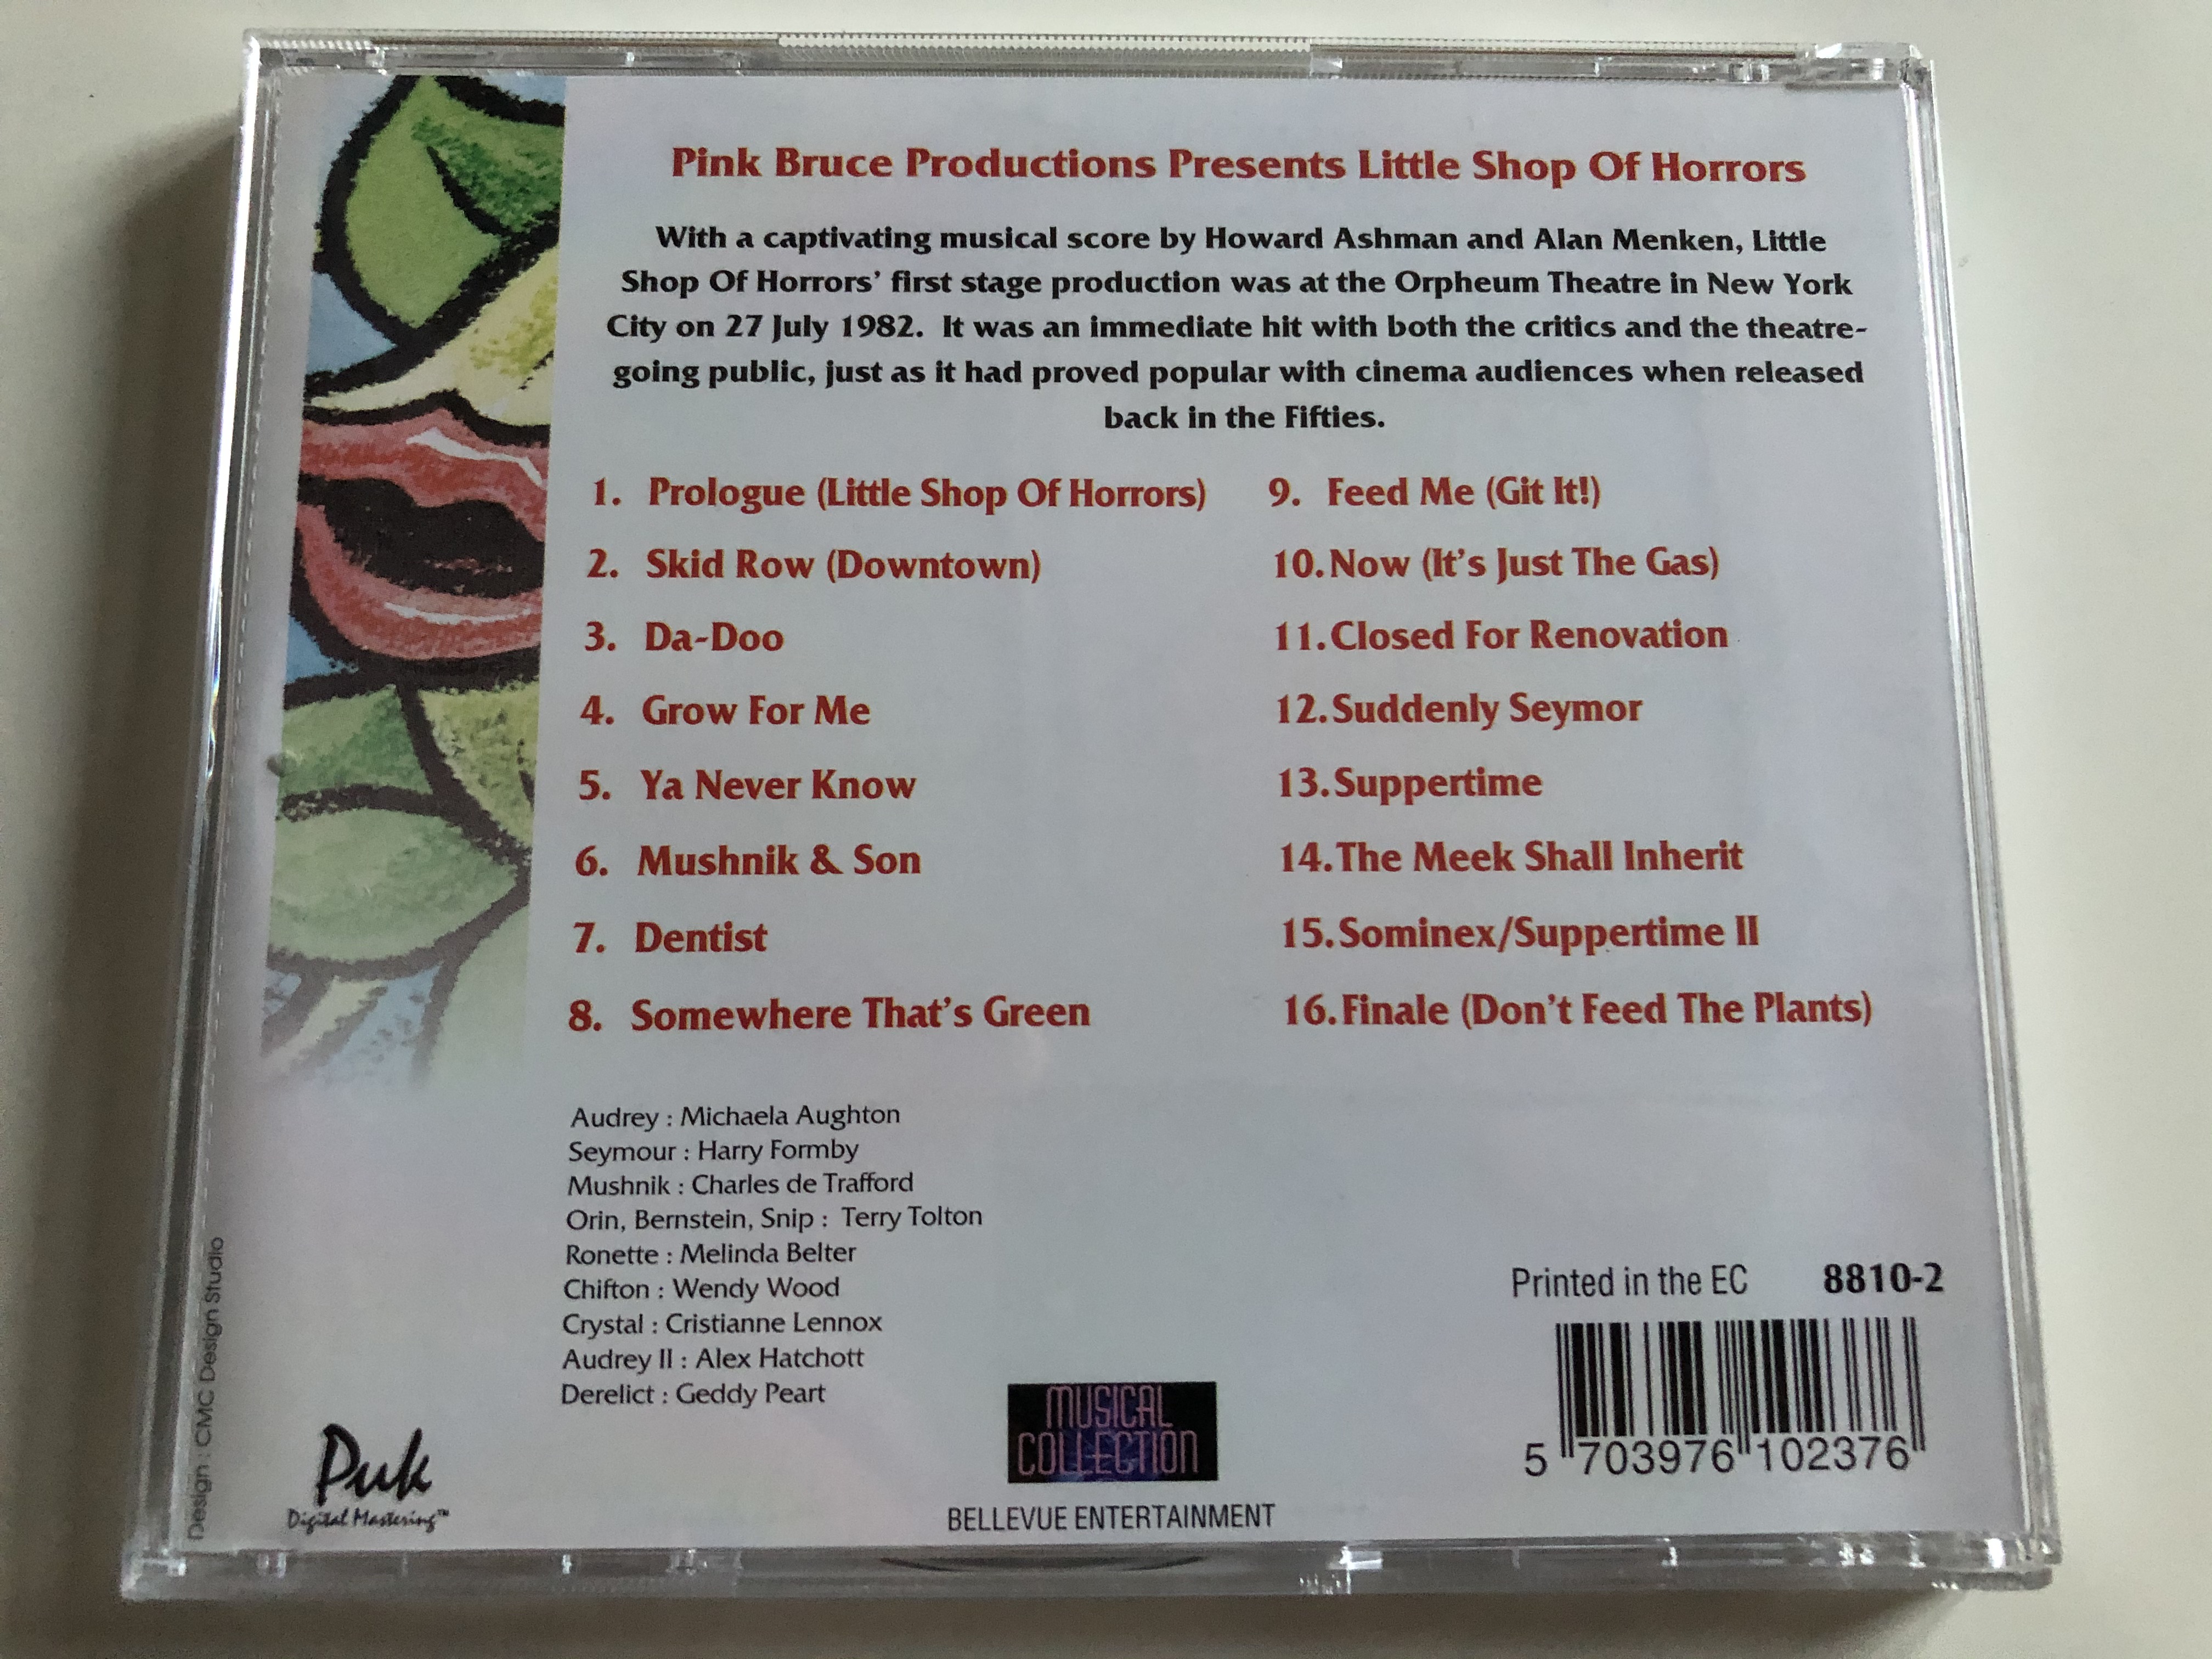 little-shop-of-horrors-includes-grow-for-me-dentist-feed-me-glt-it-suddenly-seymour-suppertime-bellevue-entertainment-audio-cd-1996-8810-2-5-.jpg